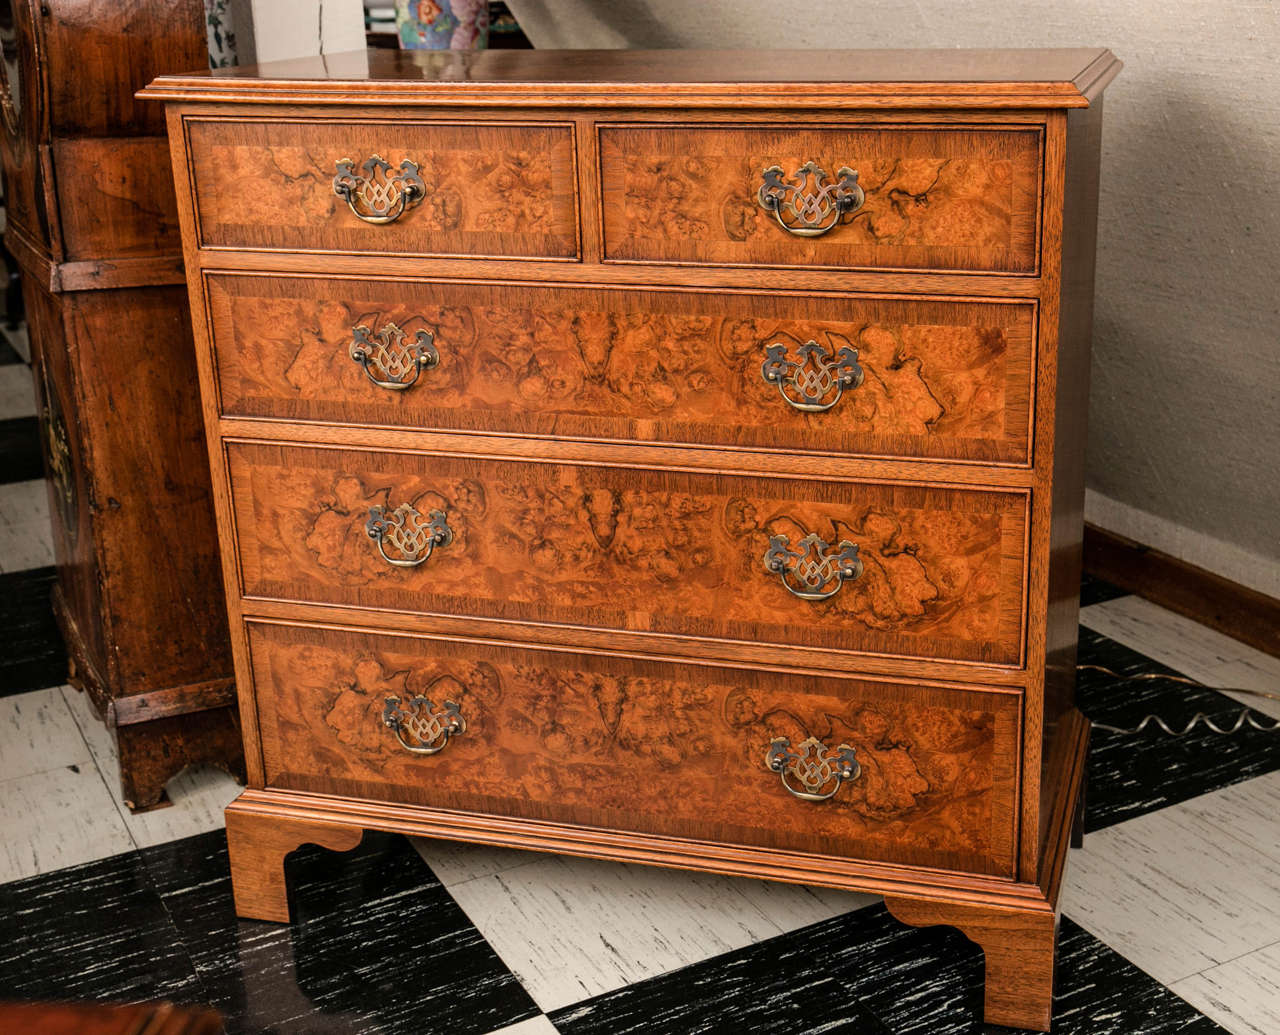 Created by our English cabinetmaker with exacting detail, this Georgian styled walnut burl chest has the traditional arrangement of two drawers over three graduated drawers, each crossbanded in straight grain walnut and mounted with brass bail